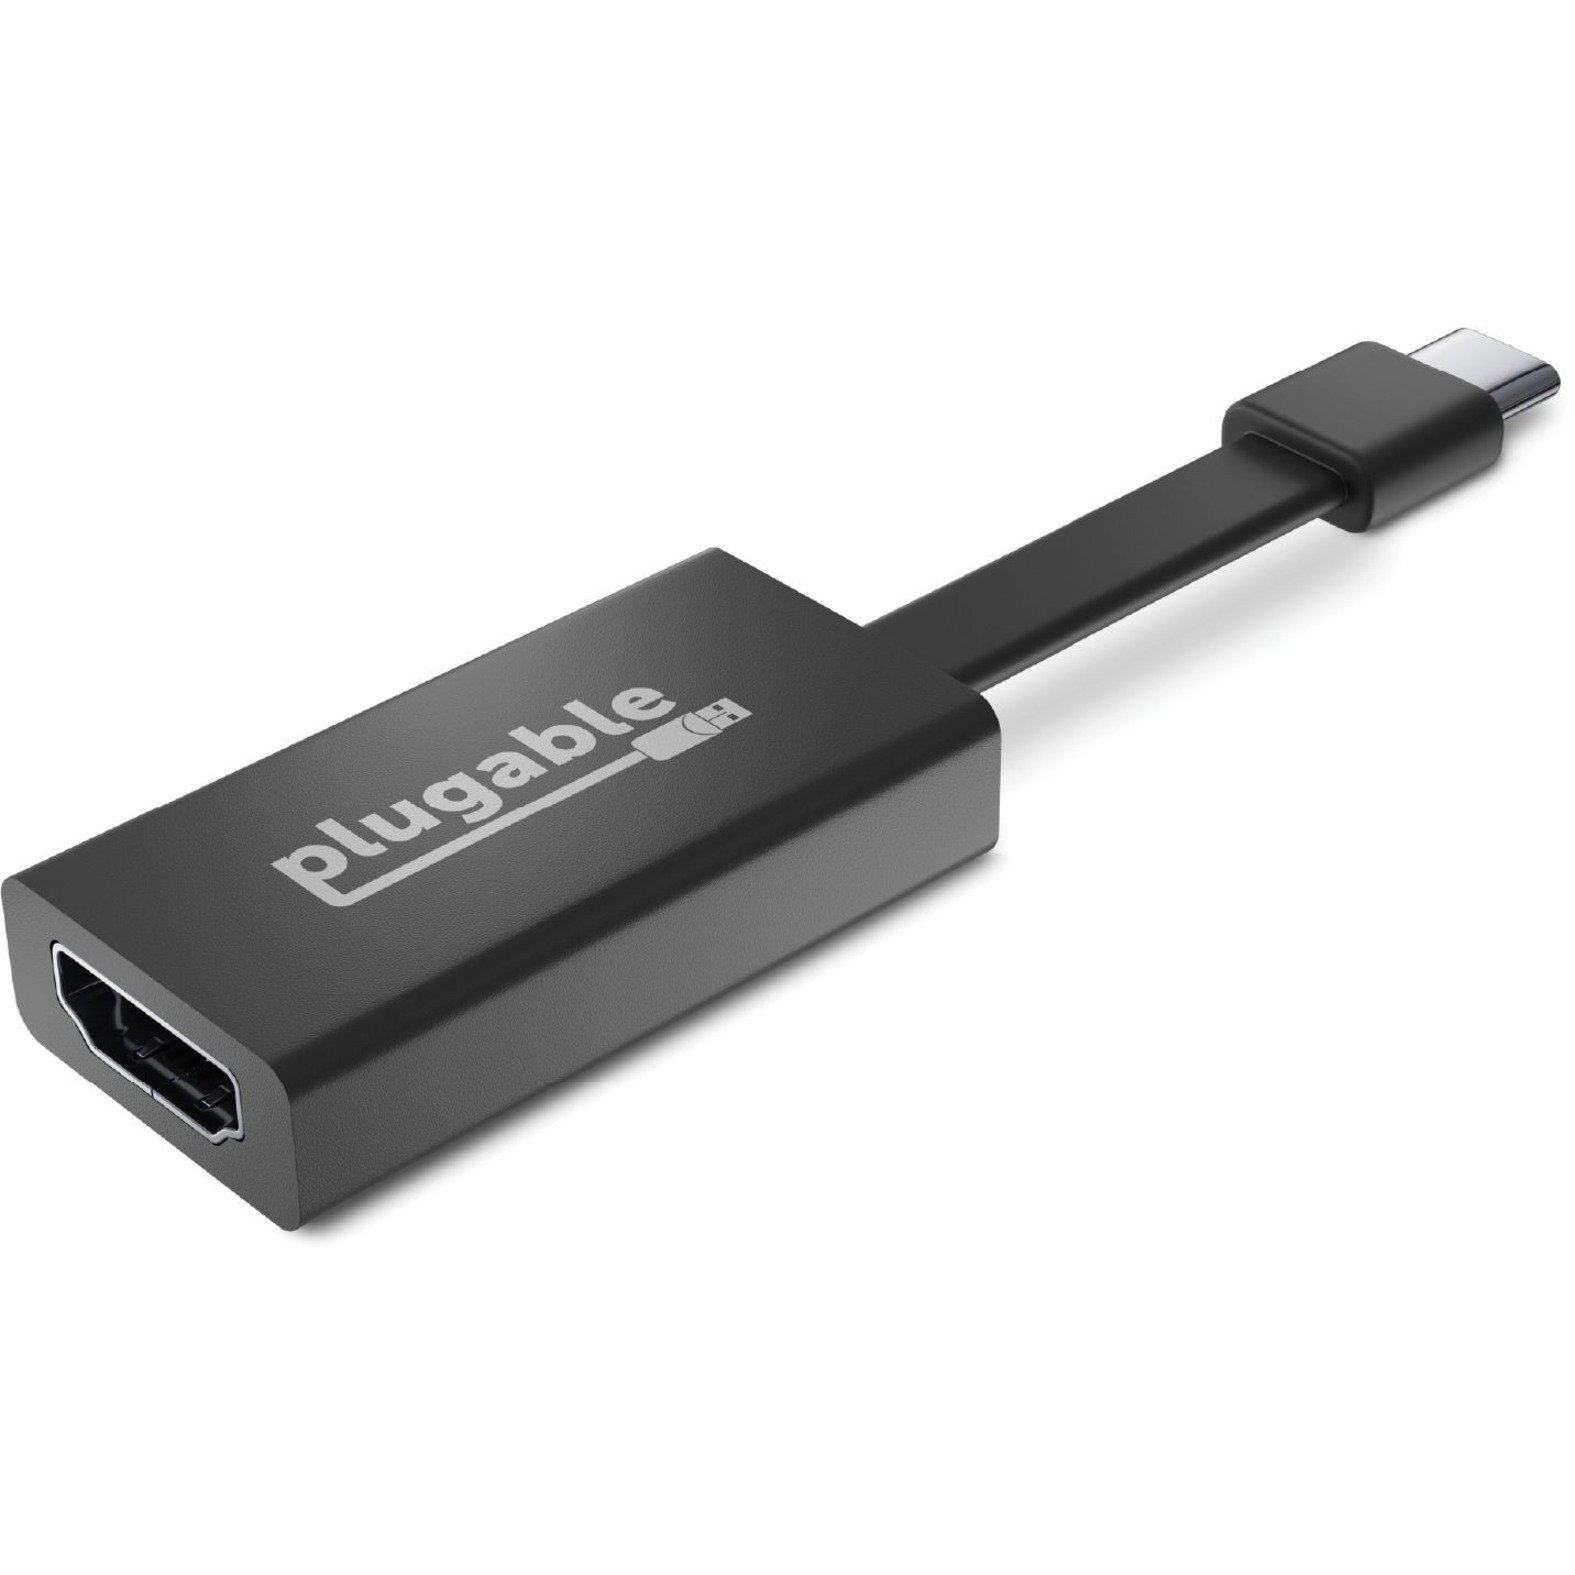 Plugable USB C to HDMI Adapter 4K 30Hz, Thunderbolt 3 to HDMI Adapter Compatible with MacBook Pro, Windows, Chromebooks, 2018+ iPad Pro, Dell XPS, Thunderbolt 3 Ports and more - image 1 of 6